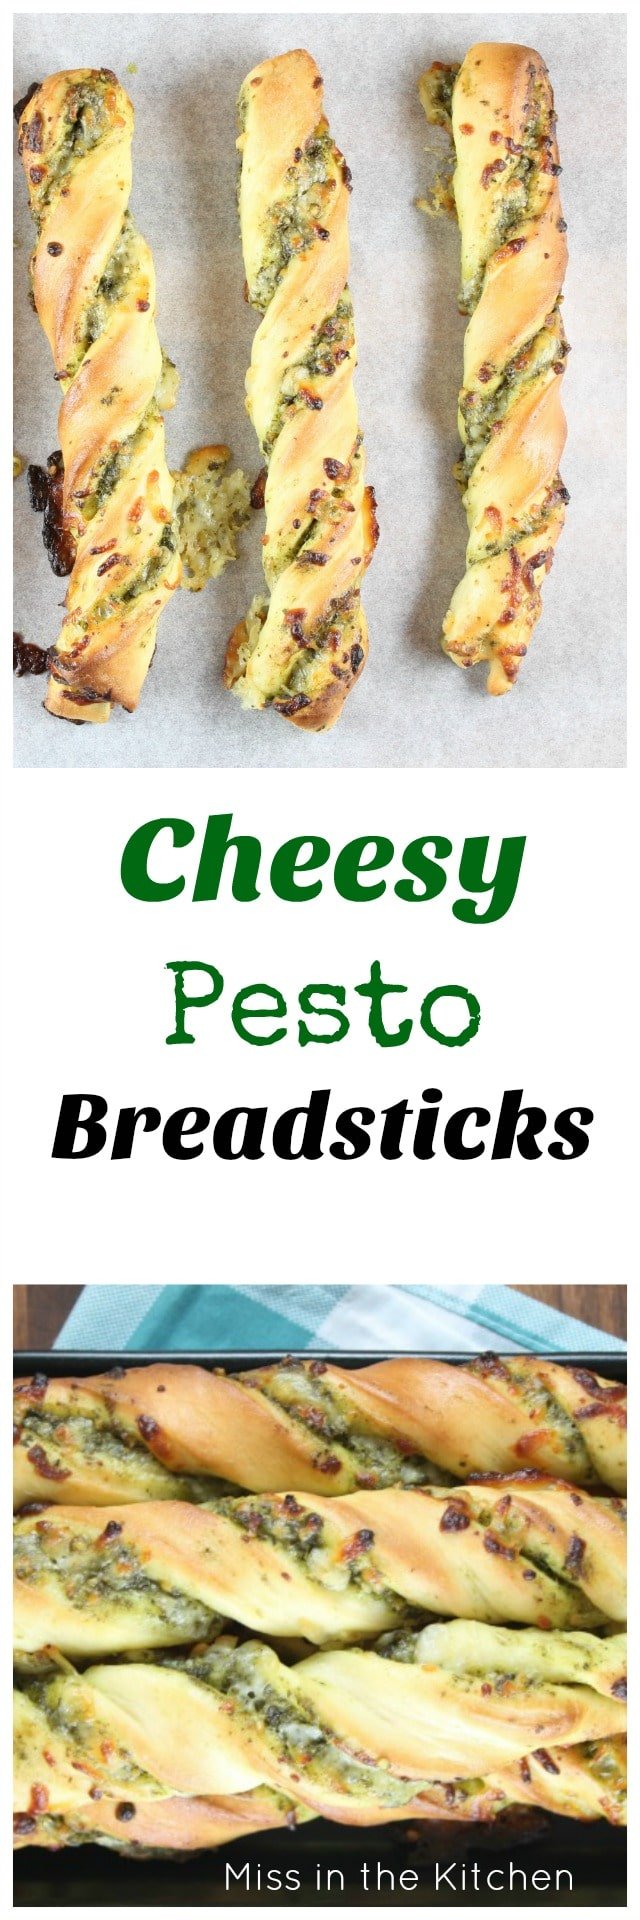 Cheesy Pesto Breadsticks are filled with ooey gooey mozzarella cheese and packed with tons of flavor from sweet basil pesto. The perfect side to any meal! Recipe from MissintheKitchen.com With Red Star Yeast #ad